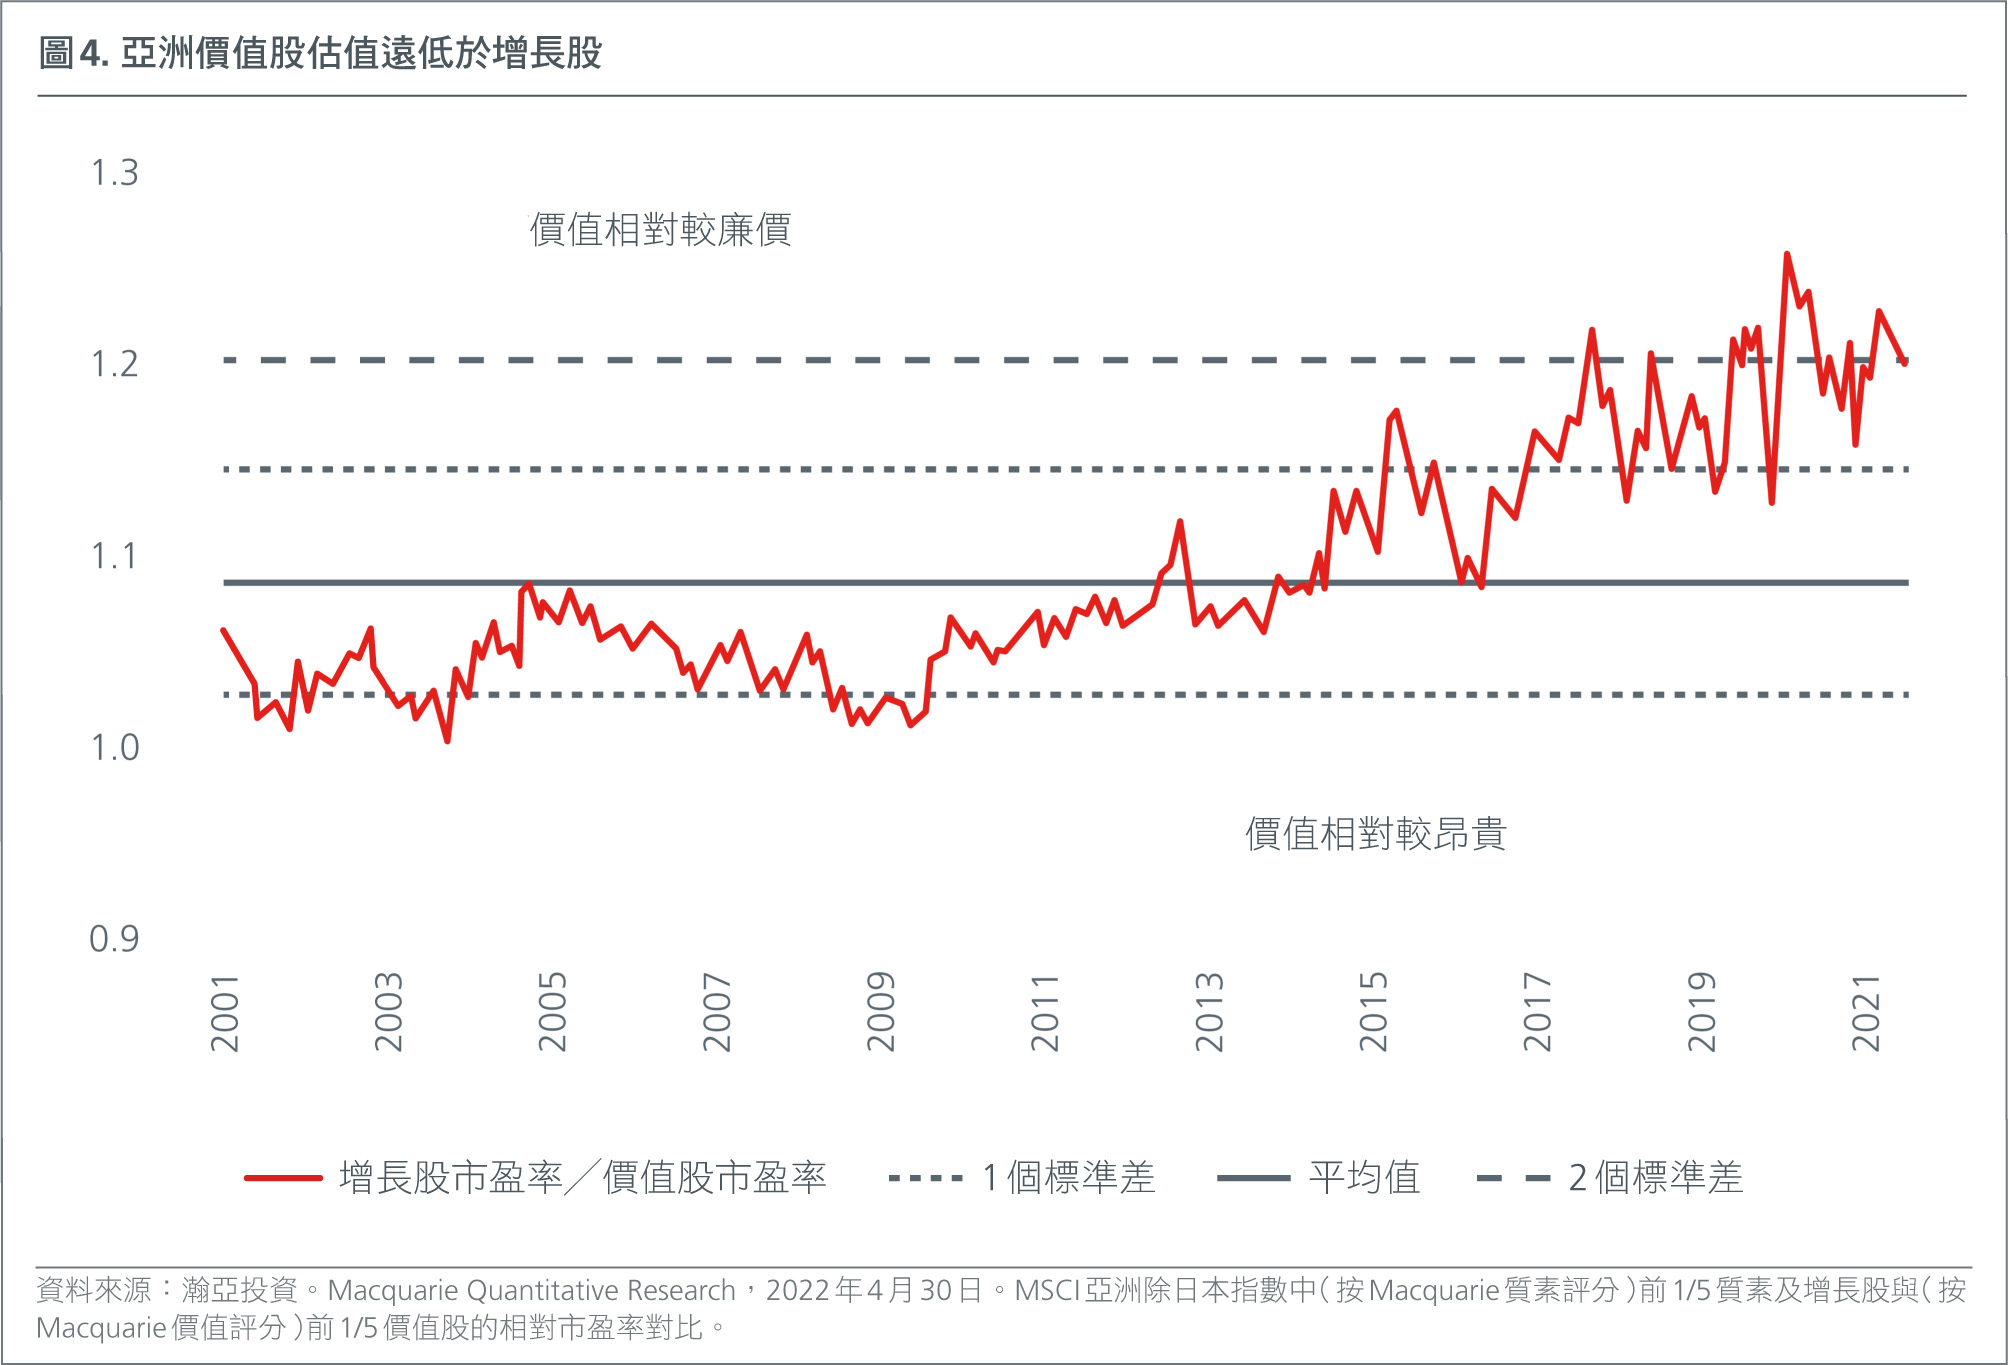 HK-CH-2022-mid-year-outlook-inflation-recession-geopolitics-FIG-1